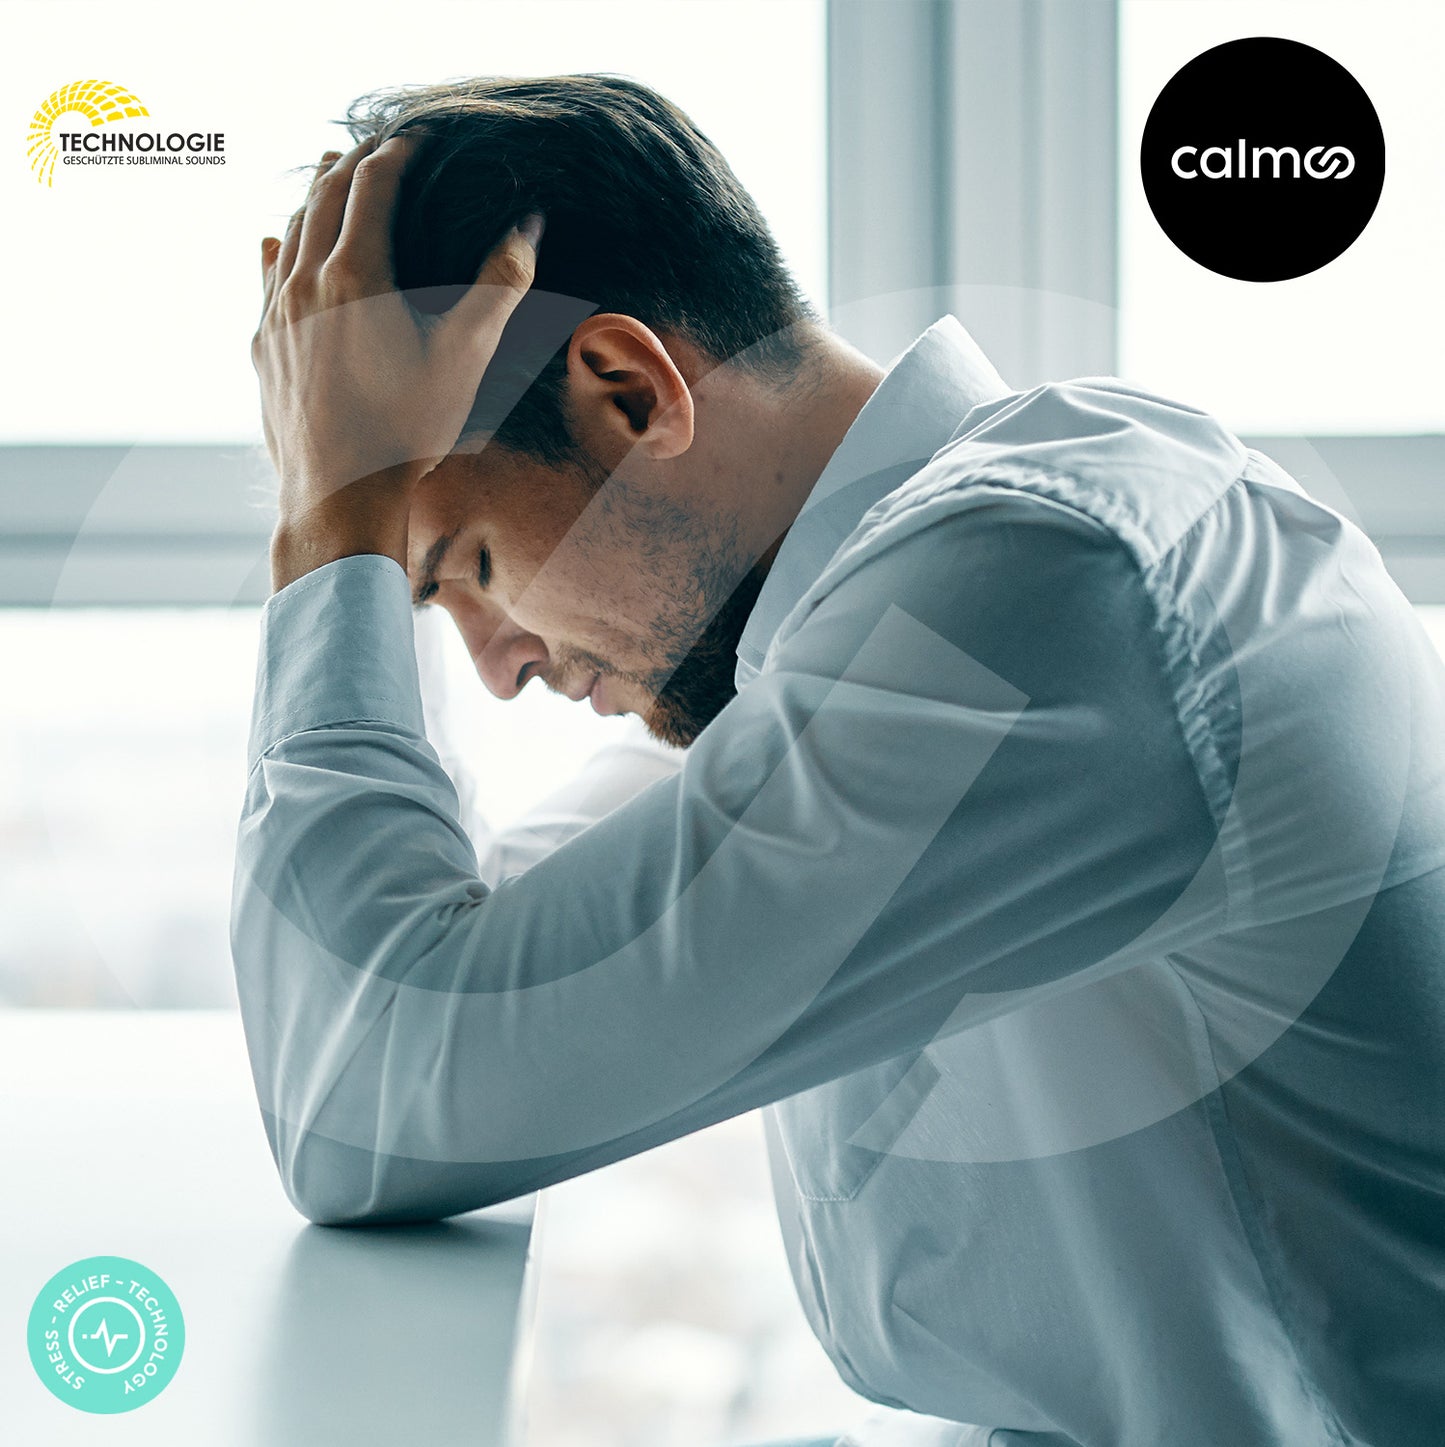 calmoo | Pure Relax System